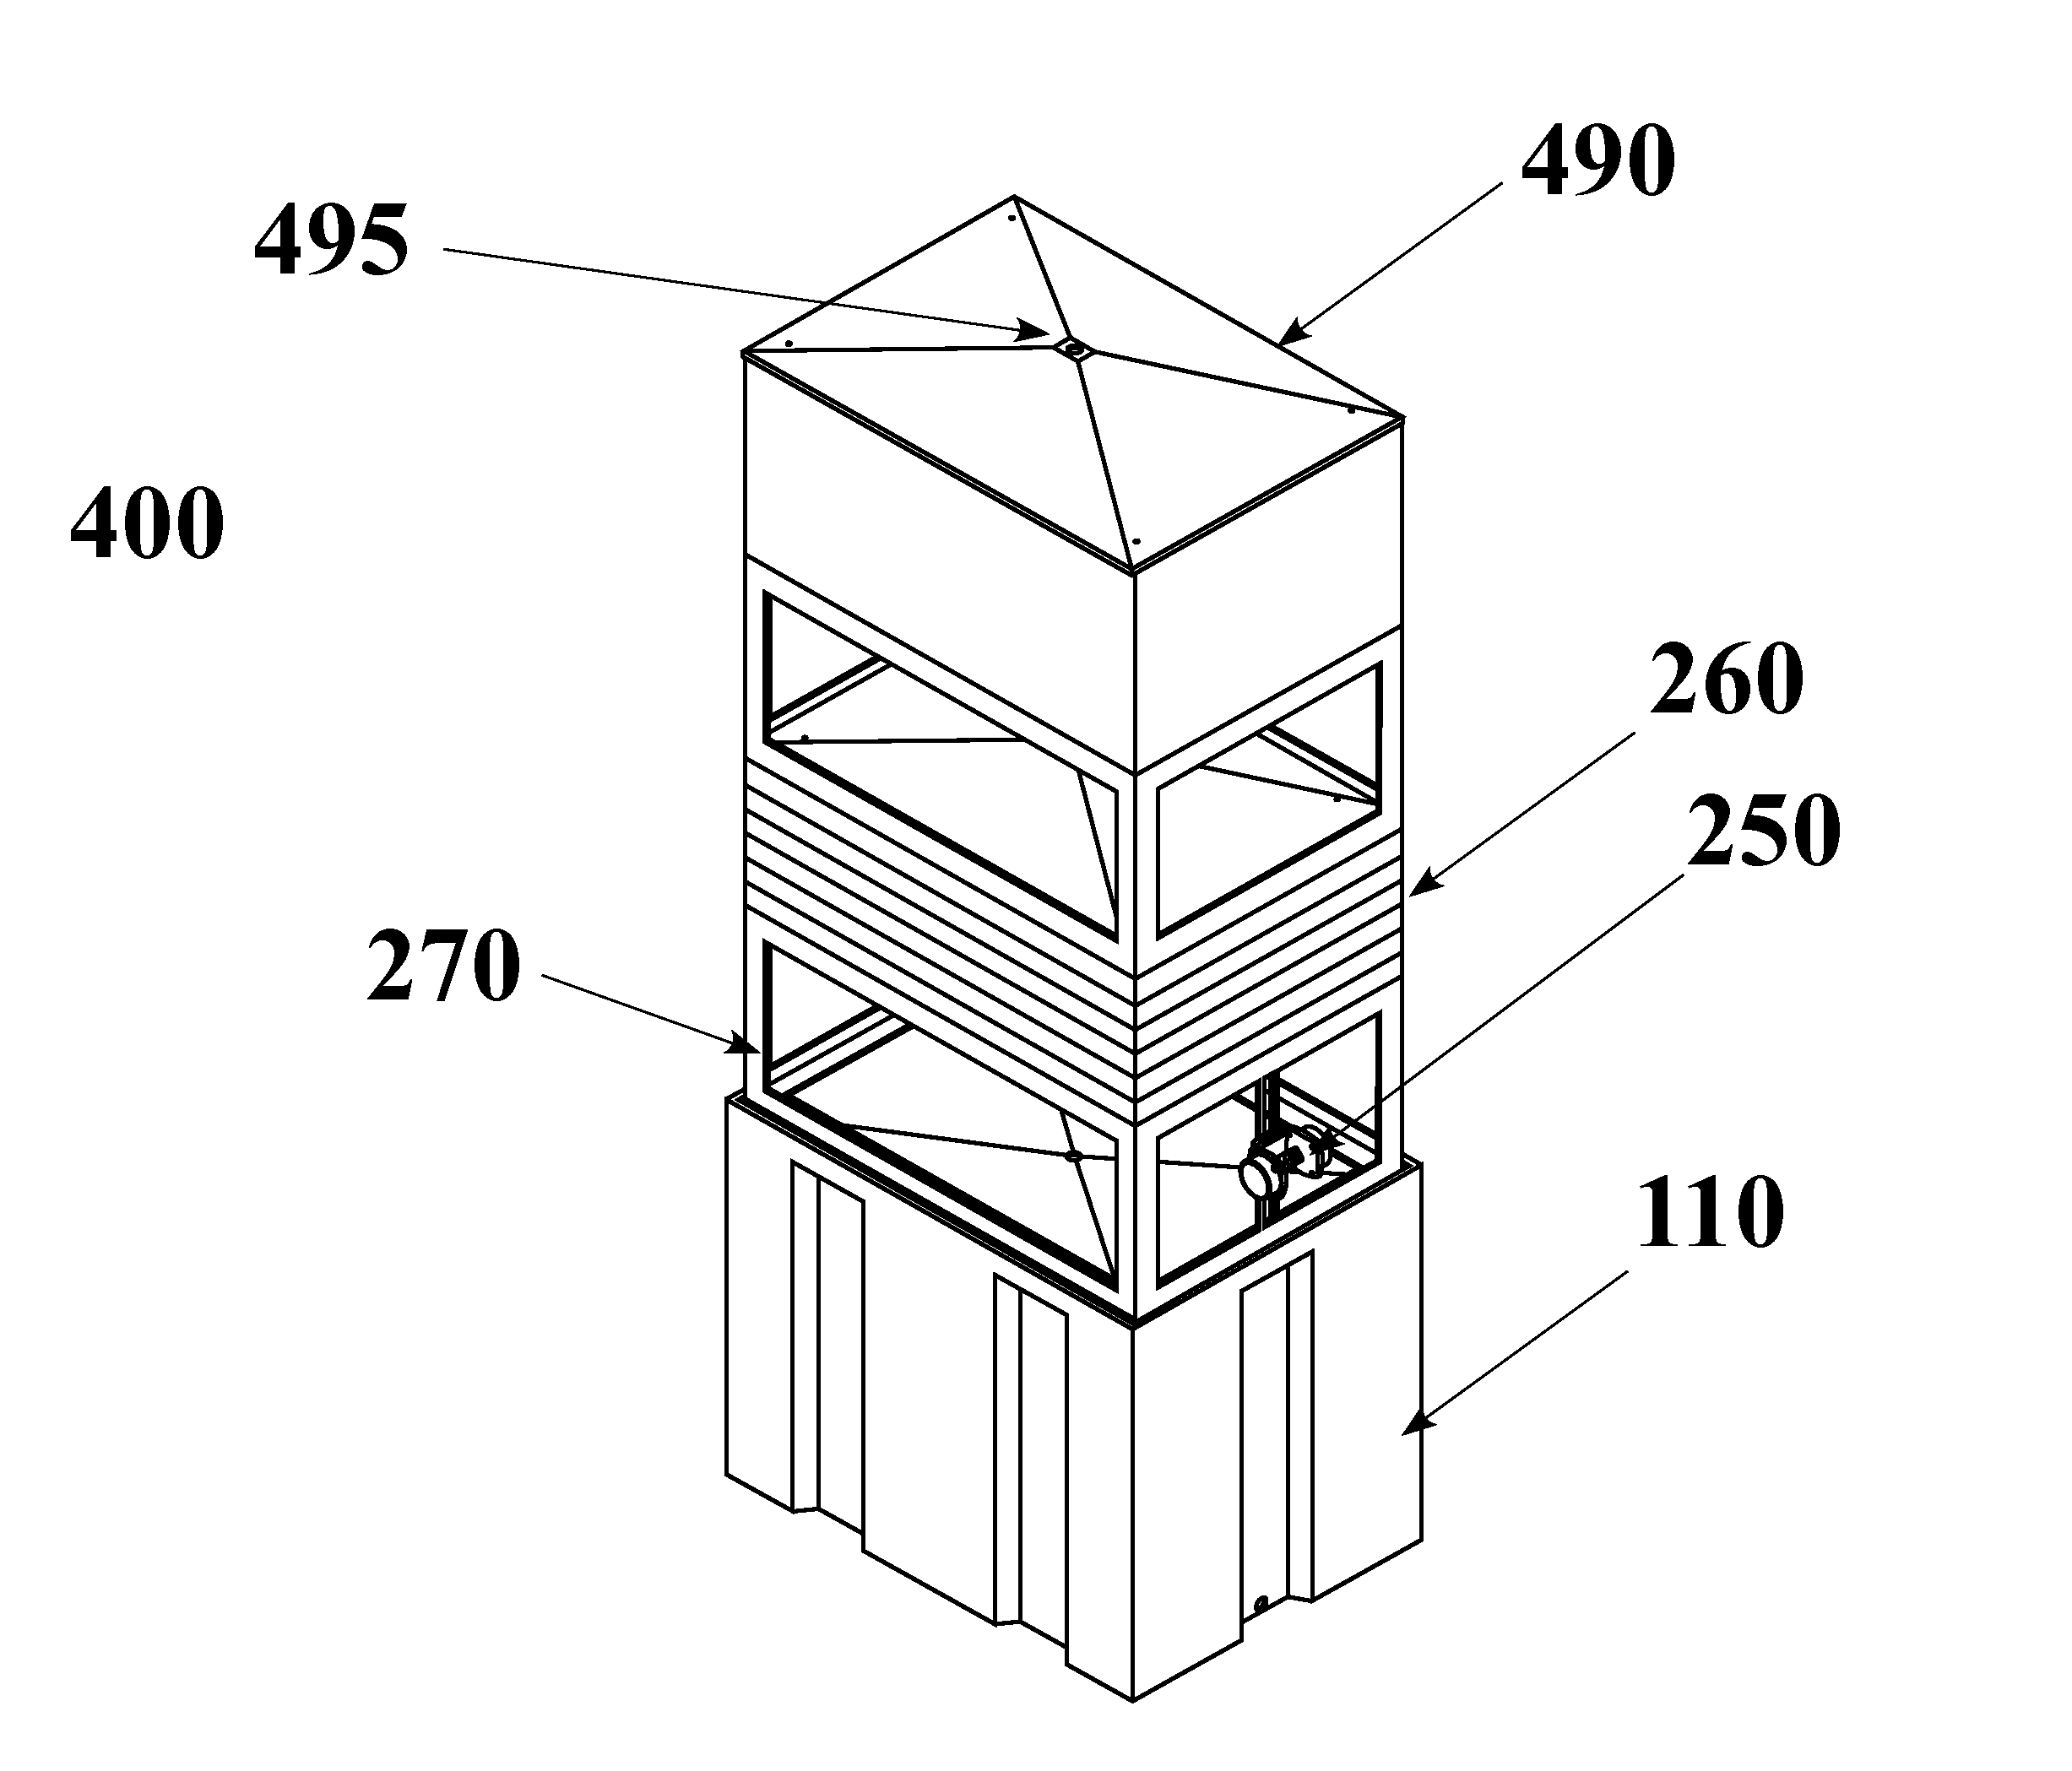 Apparatus and method for vibrational isolation of compounds